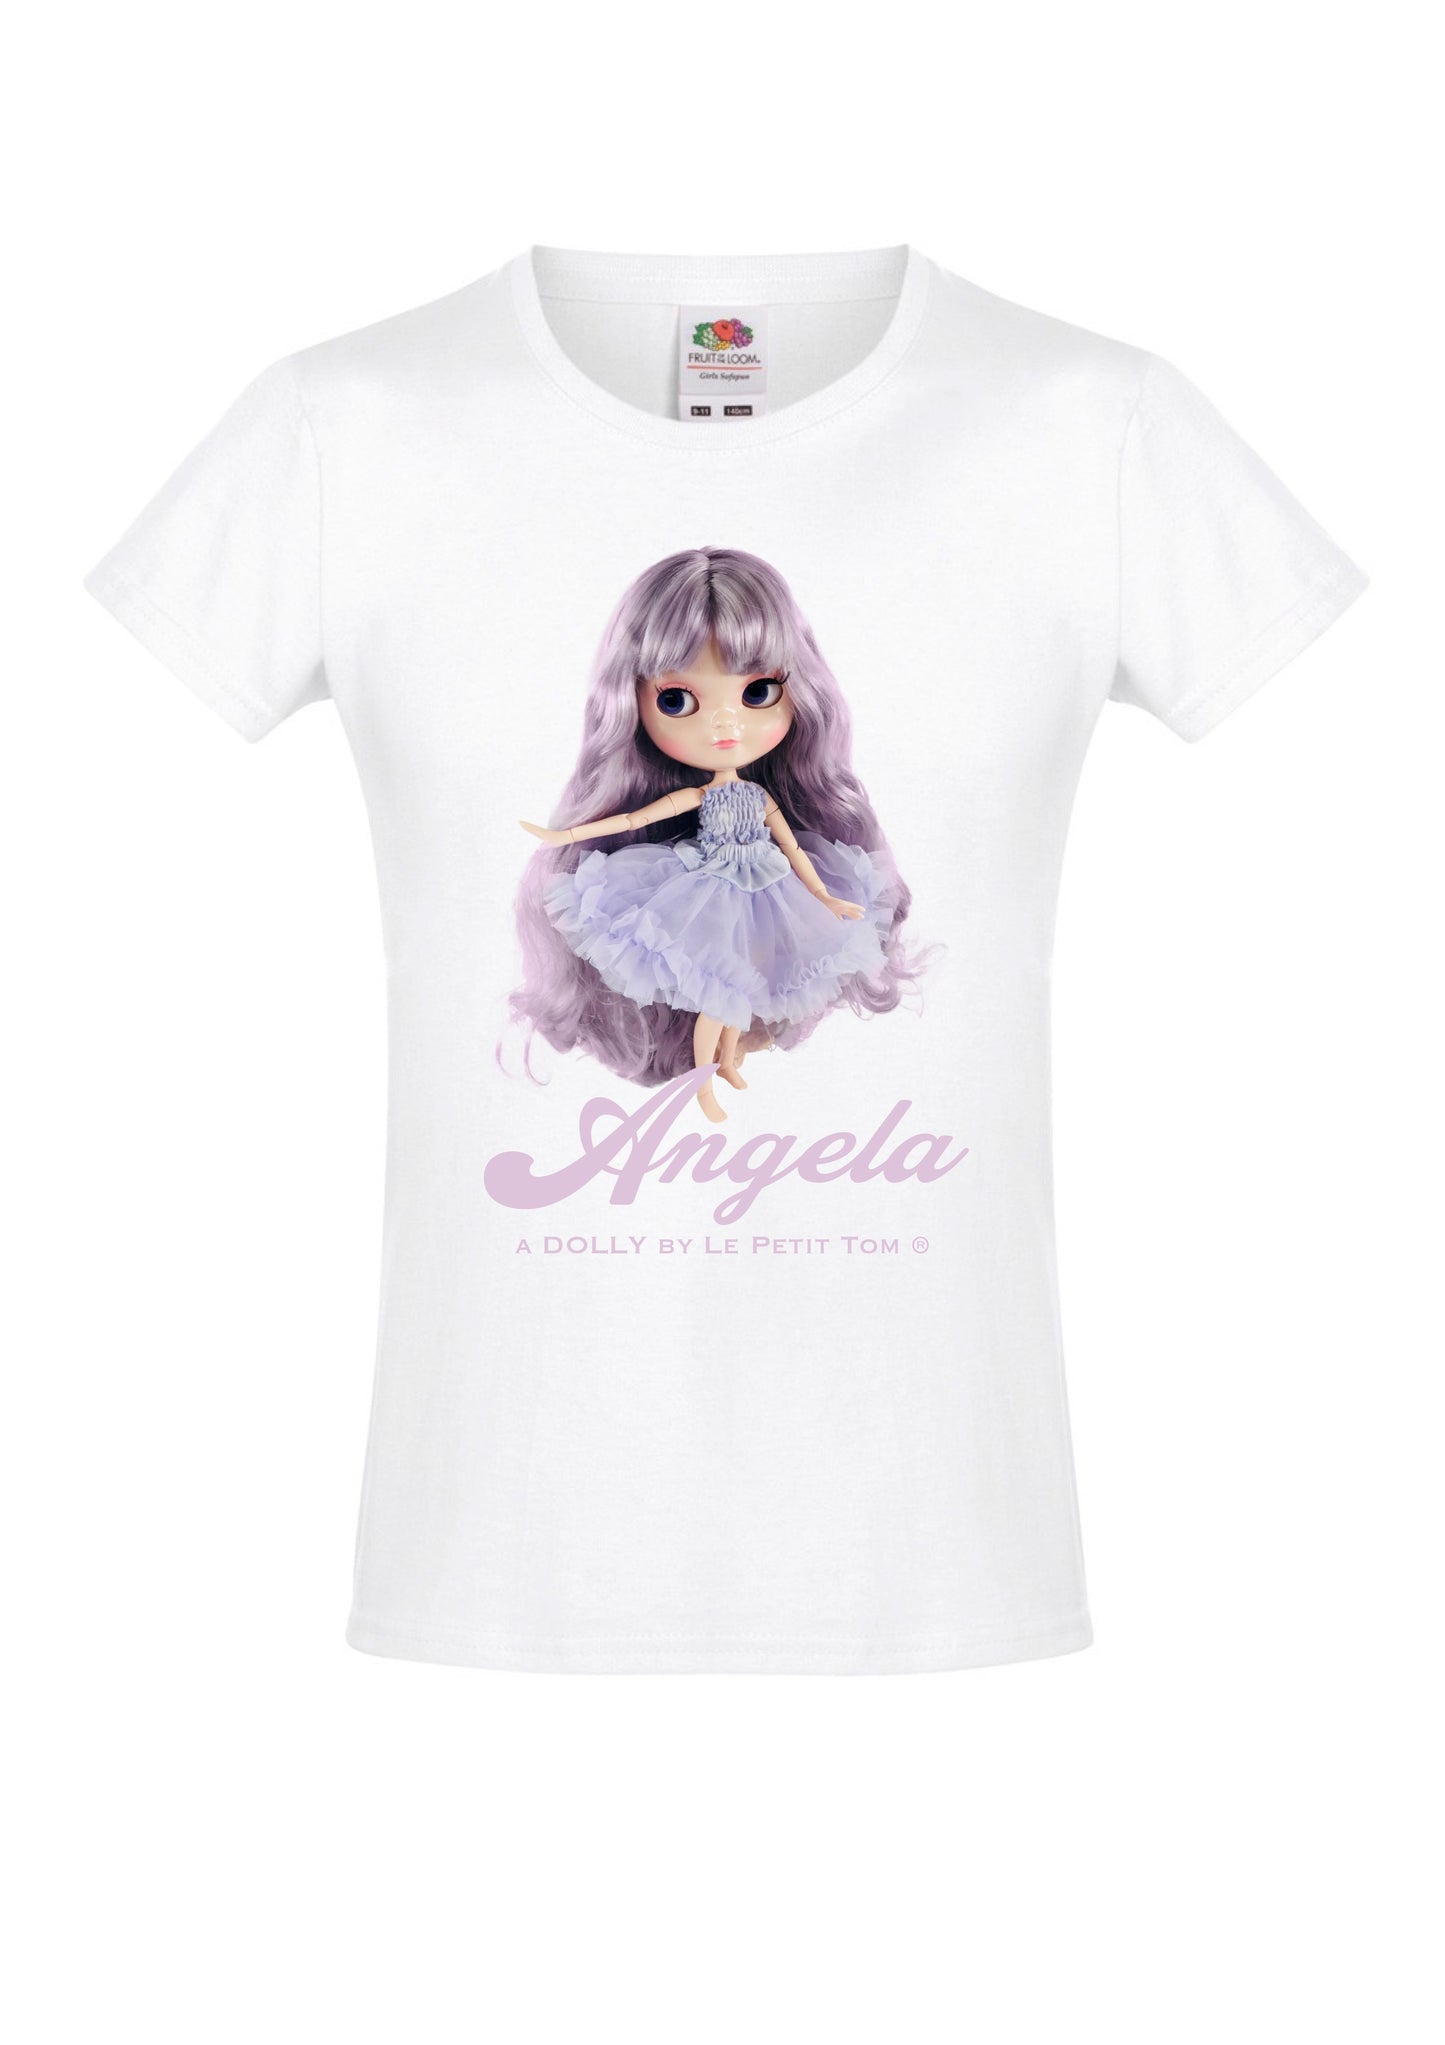 [ OUTLET] ANGELA DOLLY by Le Petit Tom ® T-shirt Angela doll lavender